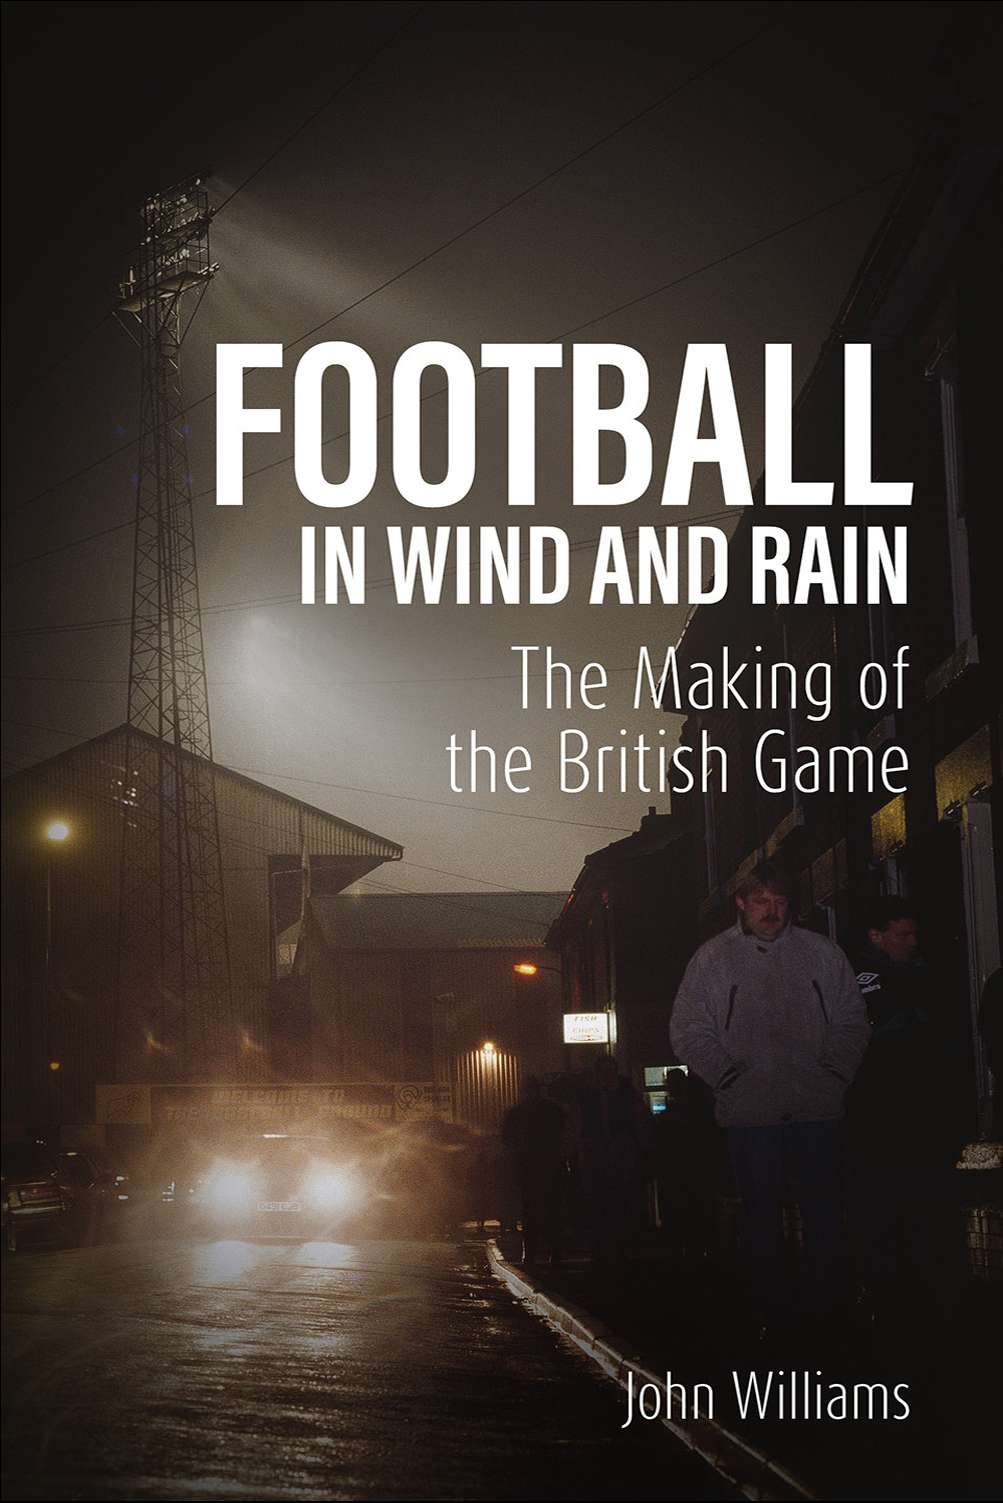 FOOTBALL IN WIND AND RAIN. Publication date: October 28, 2024